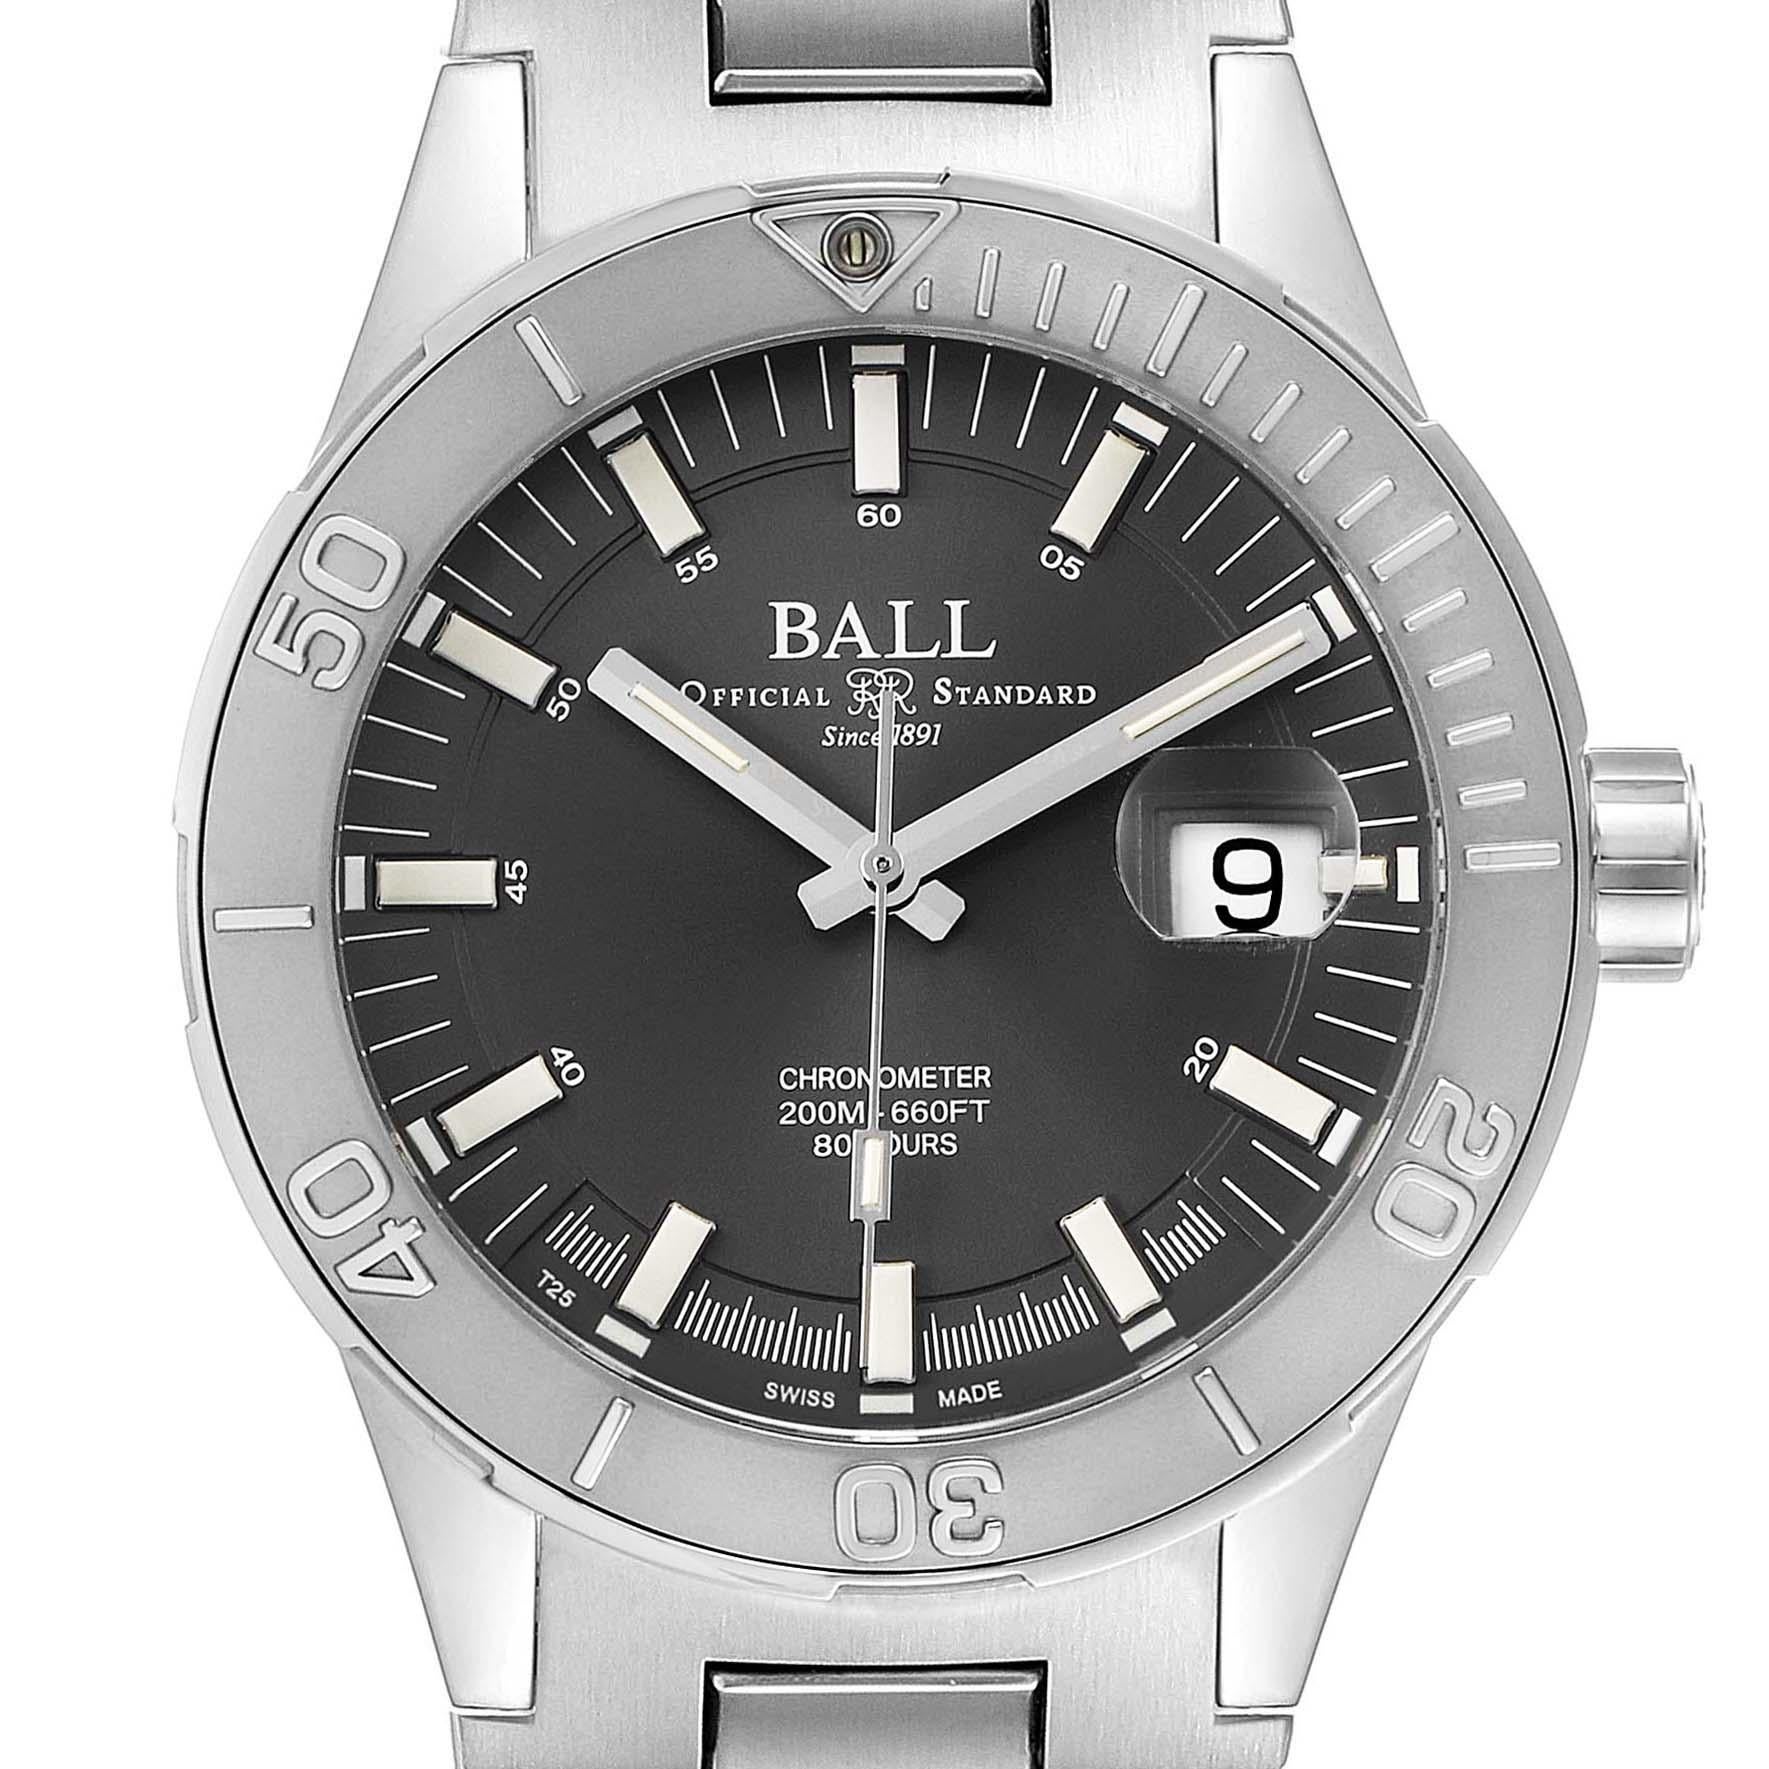 Ball Roadmaster M Skipper Limited Edition Mens Watch DM3130B Box Card. Automatic self-winding movement. Officially certified Swiss chronometer (COSC). Stainless steel case 40.0 mm in diameter.Transparent exhibition sapphire crystal case back. Ball